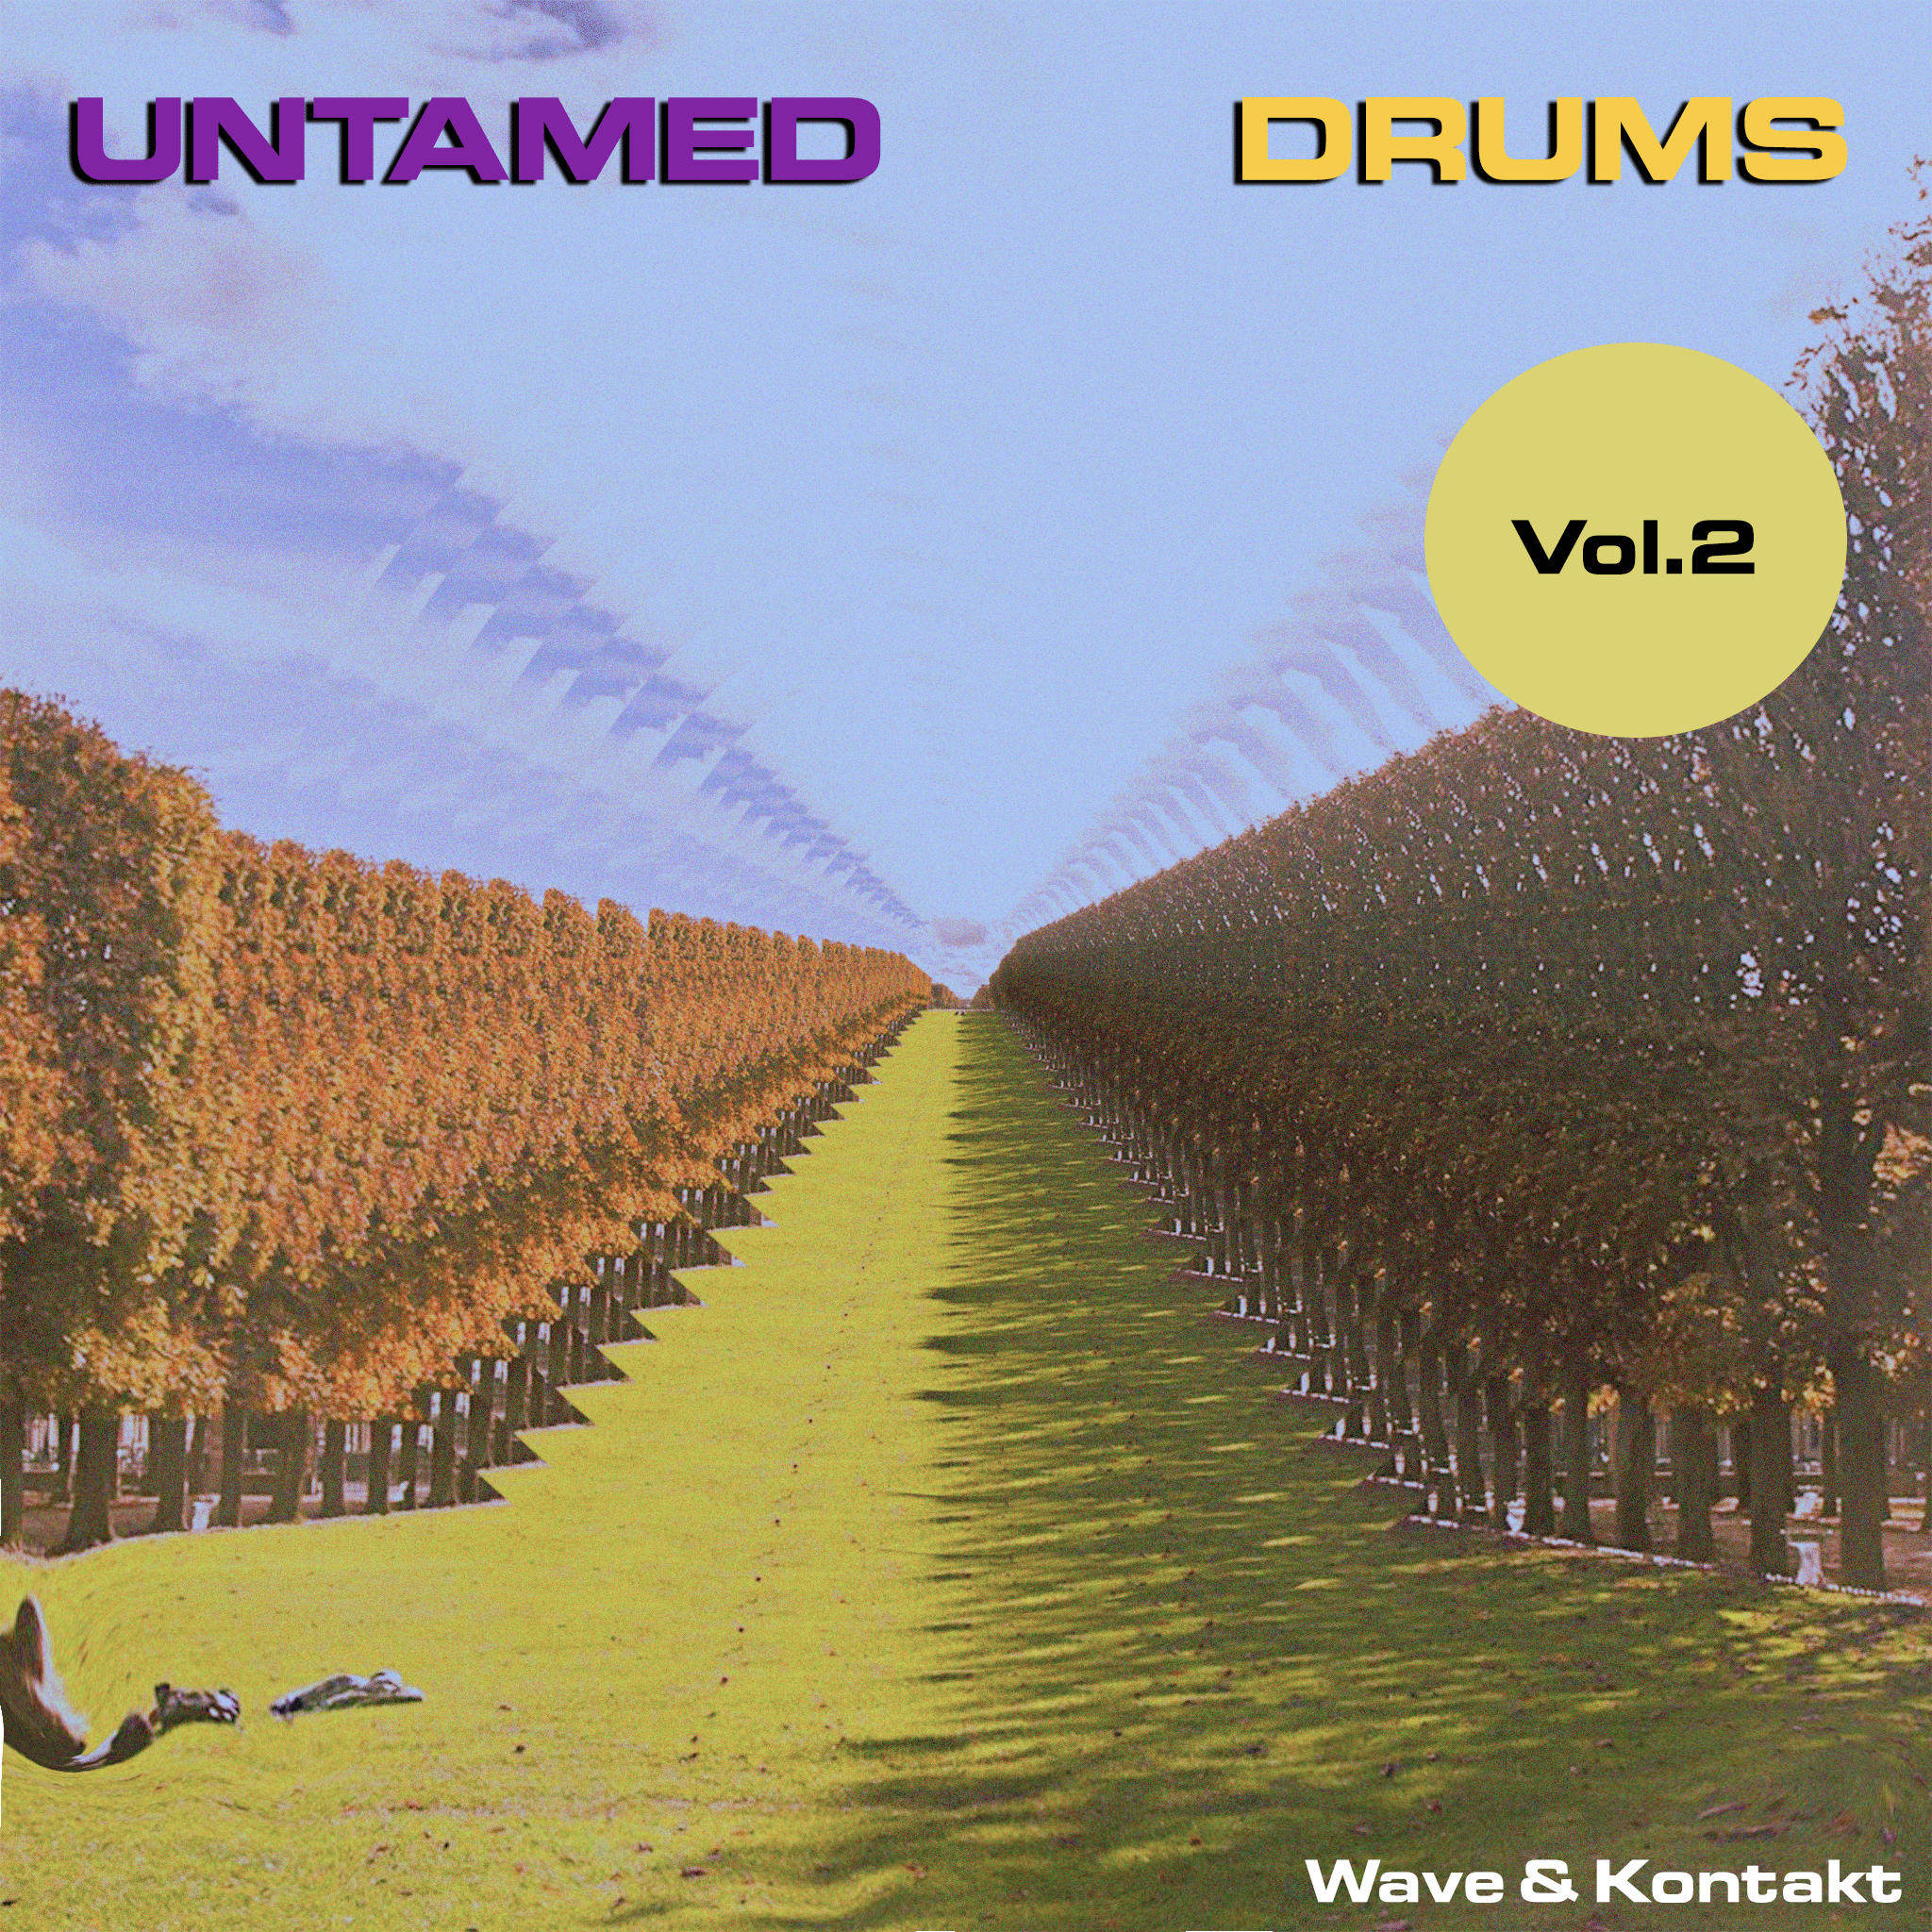 Untamed Drums VOL.2 by Past To Future Samples